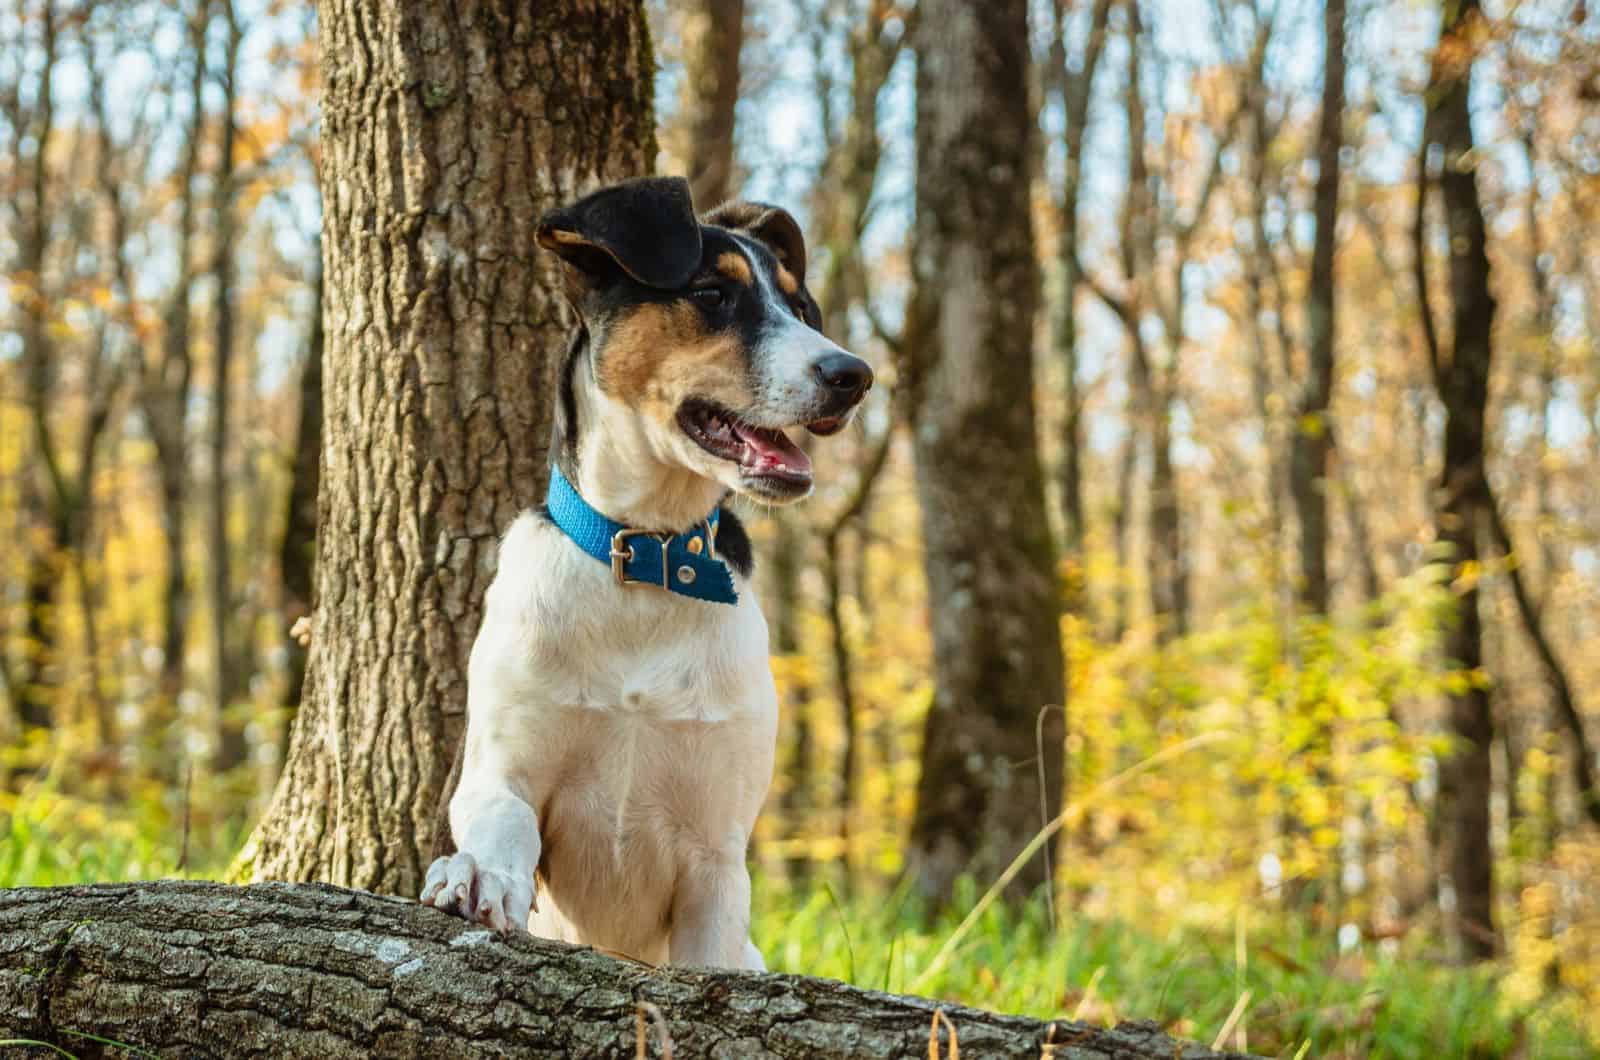 What Is A Hanging Tree Dog And Should You Get One Yourself?